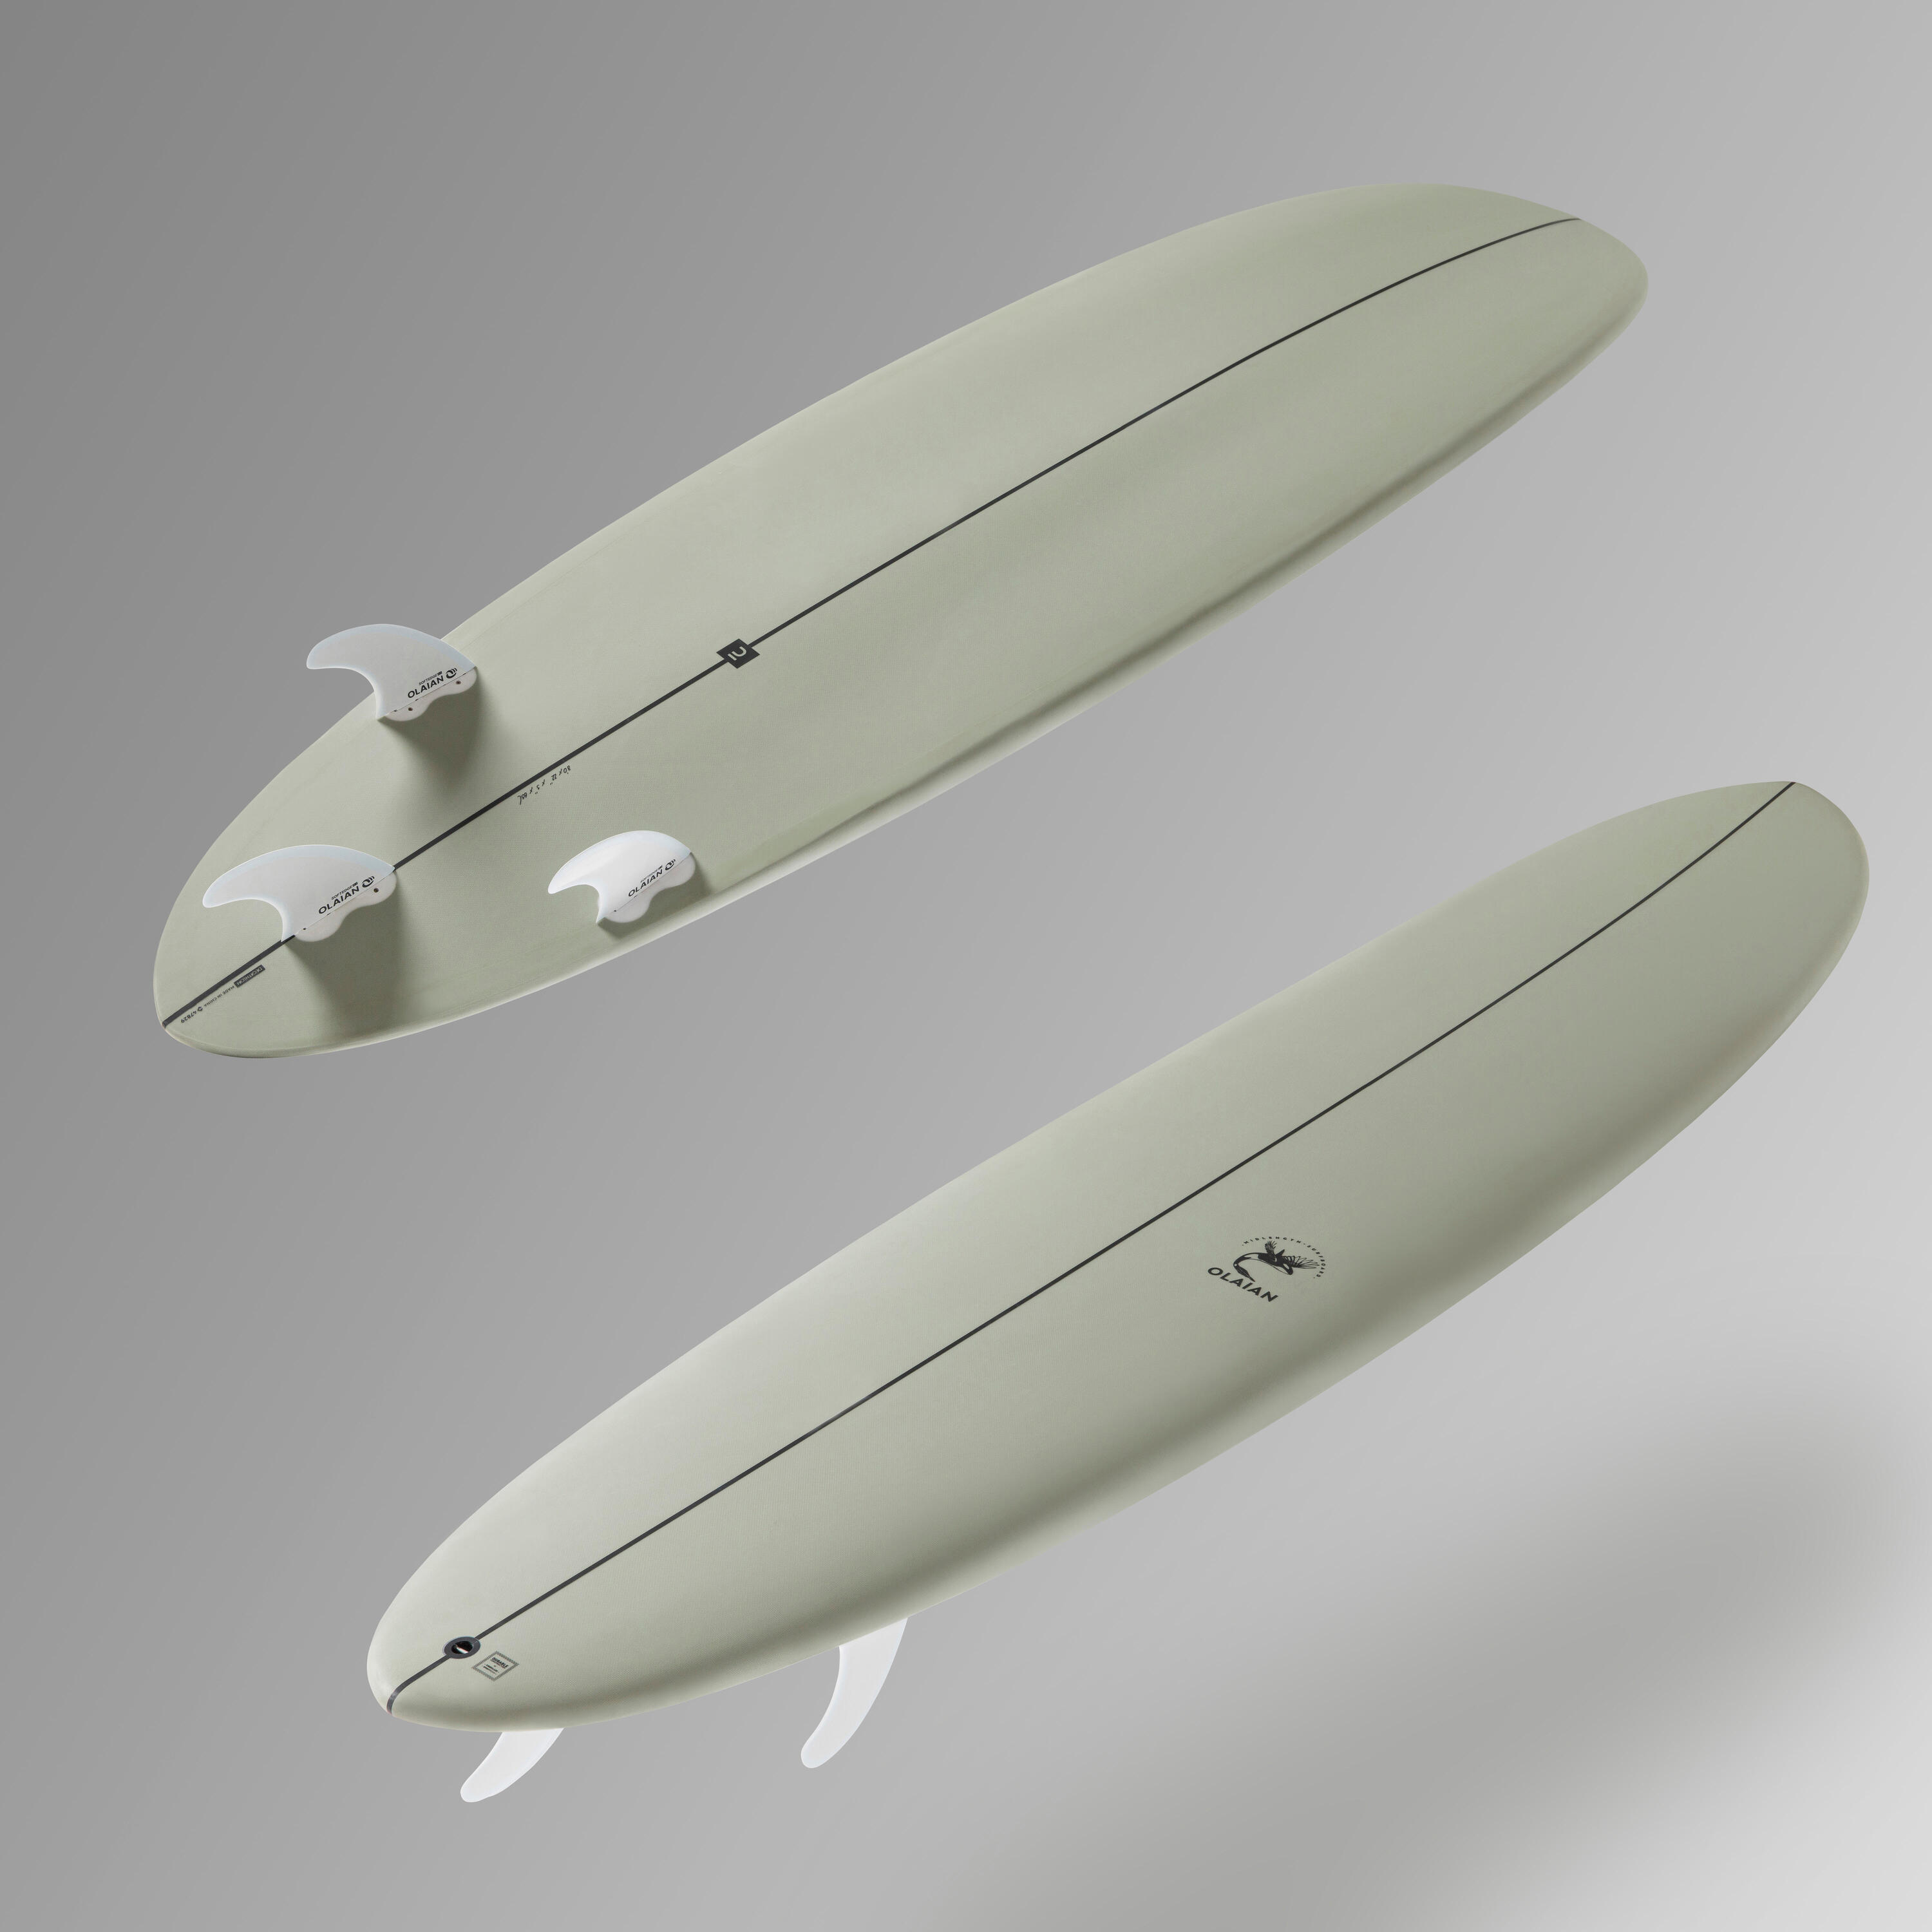 SURFBOARD 500 Hybrid 8' with 3 Fins. 7/15